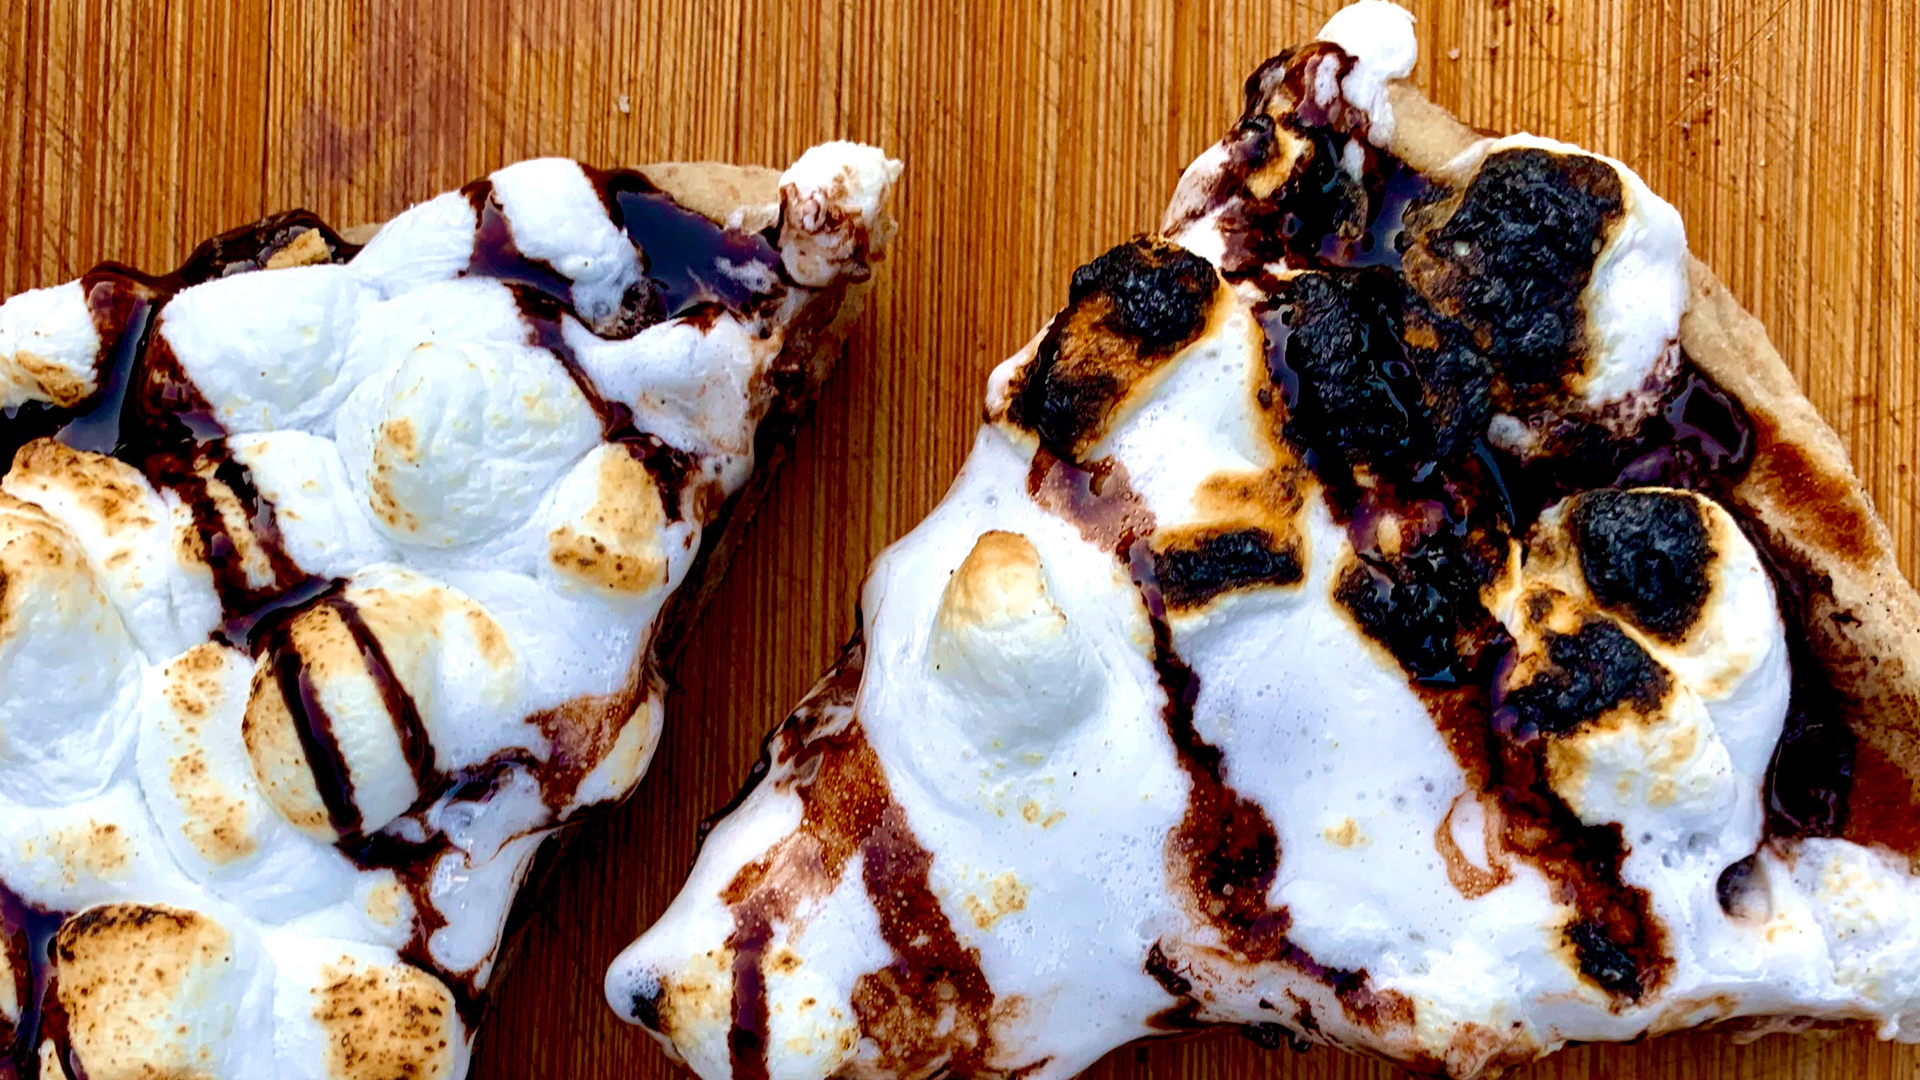 Peanut butter s'mores pizza